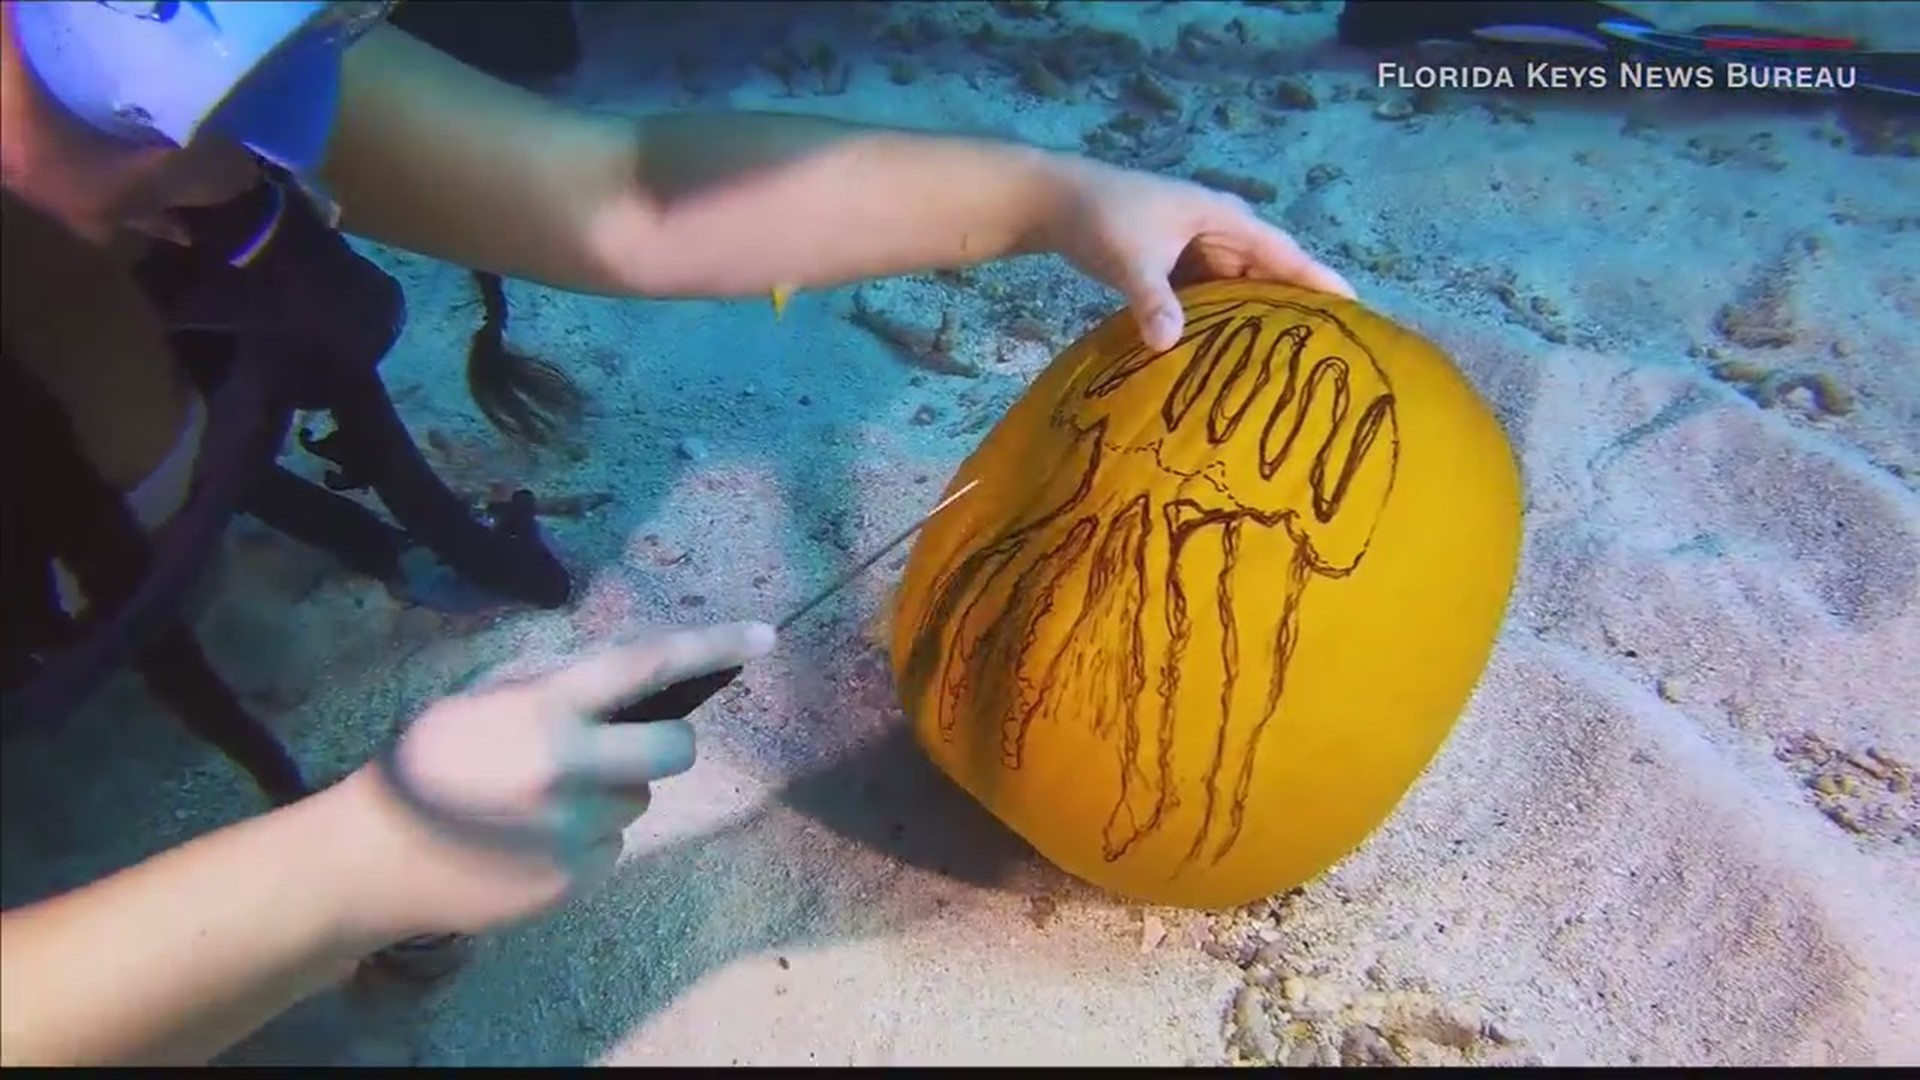 Teams of divers went underwater for this jack-o-lantern challenge.